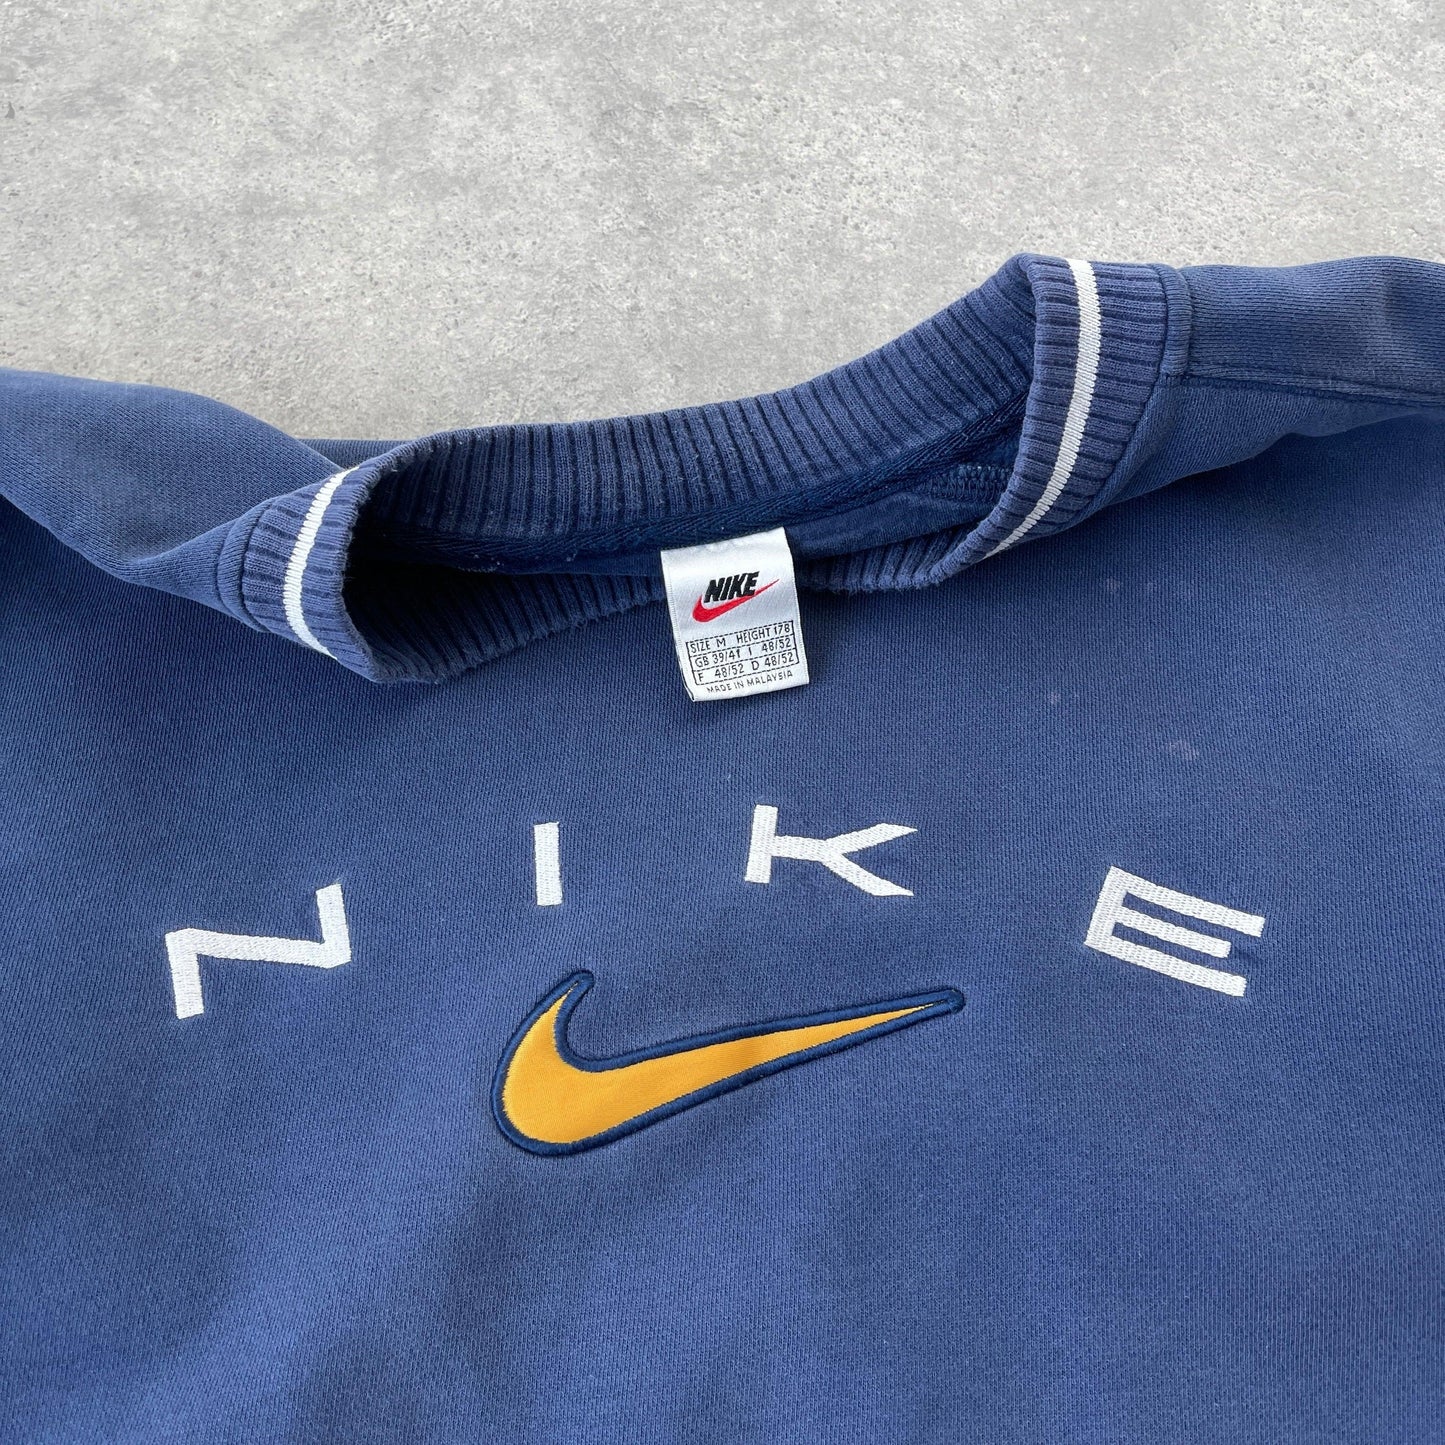 Nike RARE 1990s heavyweight embroidered spellout sweatshirt (M) - Known Source